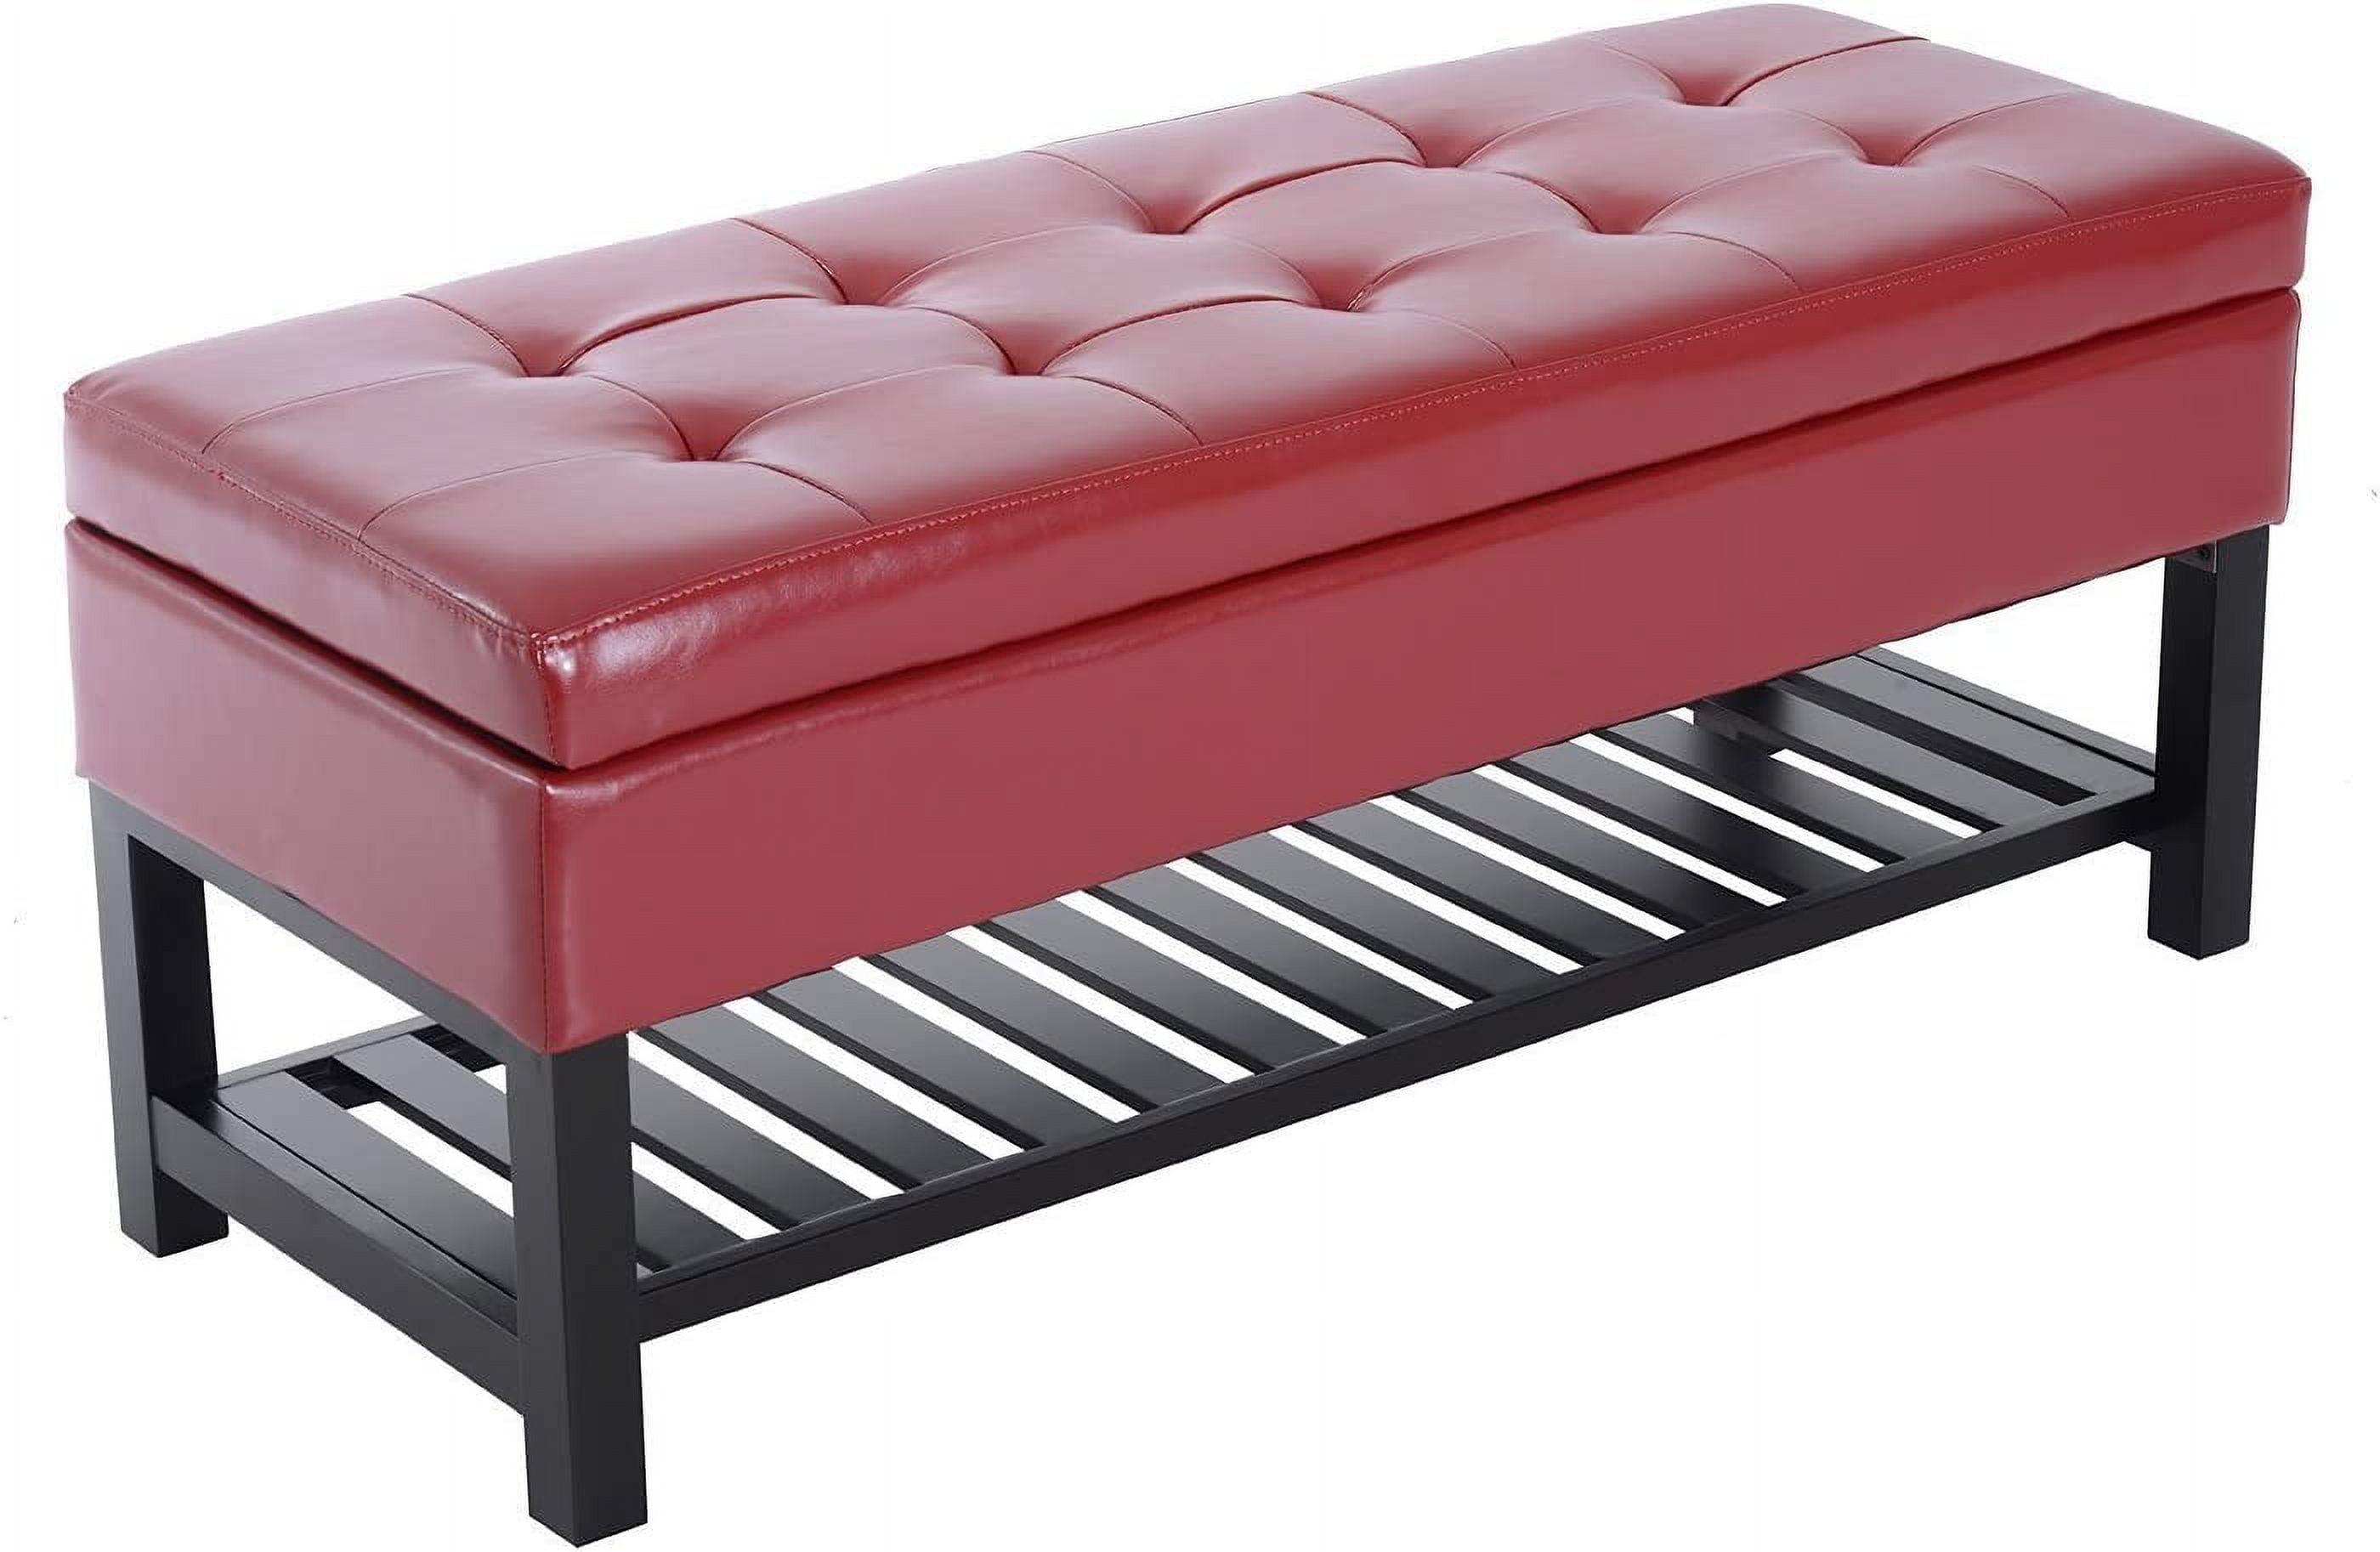 Elegant Crimson Red Faux Leather Ottoman Storage Bench with Shoe Rack